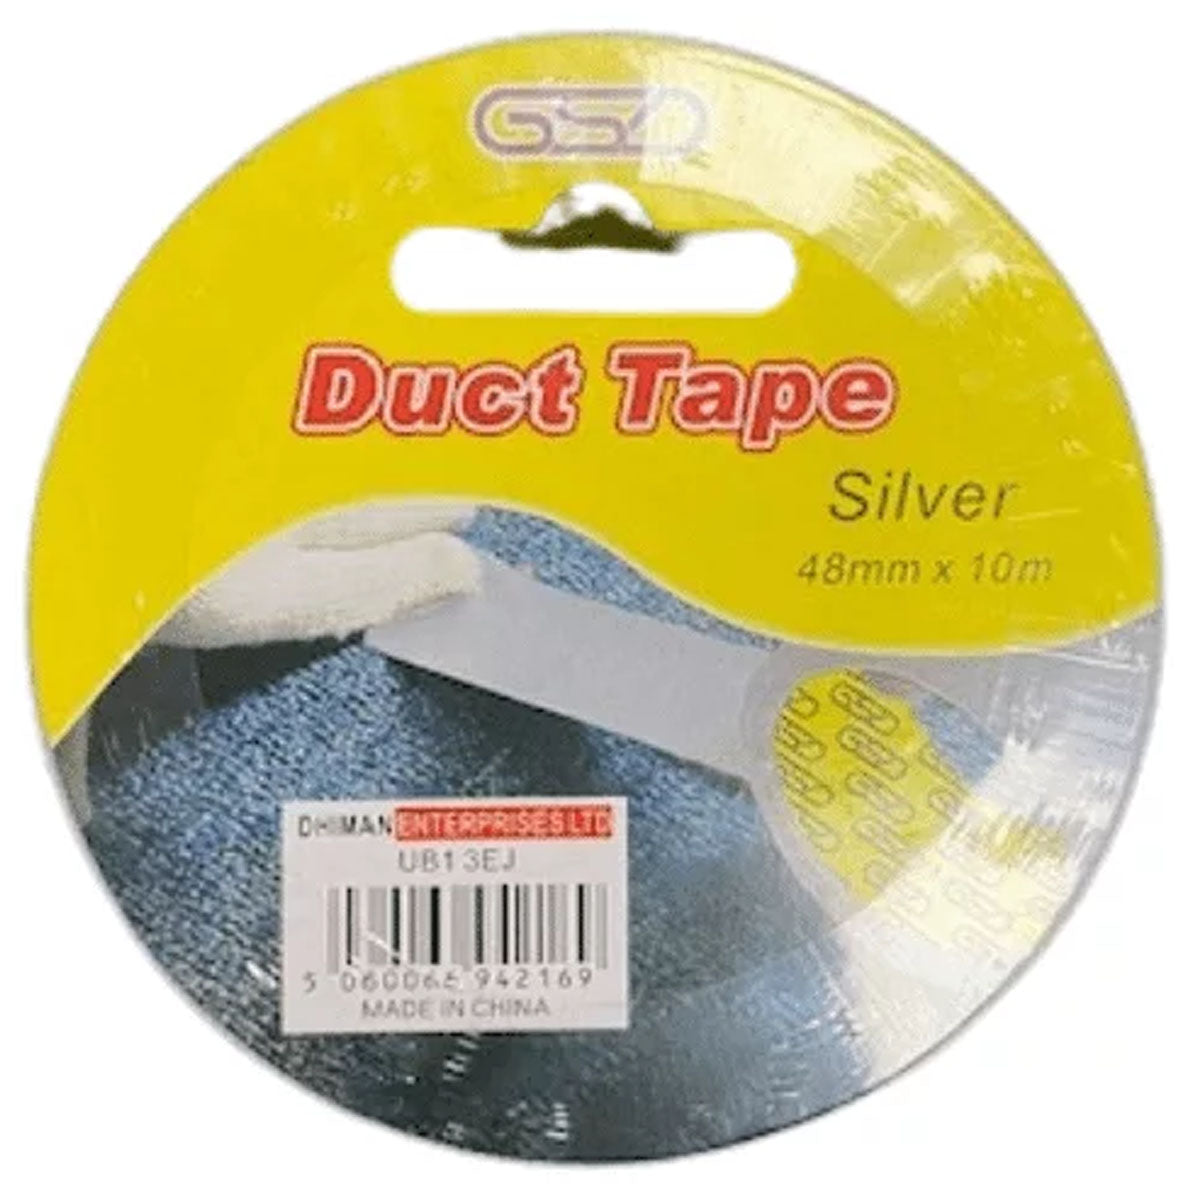 Gsd - Duct Tape Silver Small - 48mm x 10m in a package.